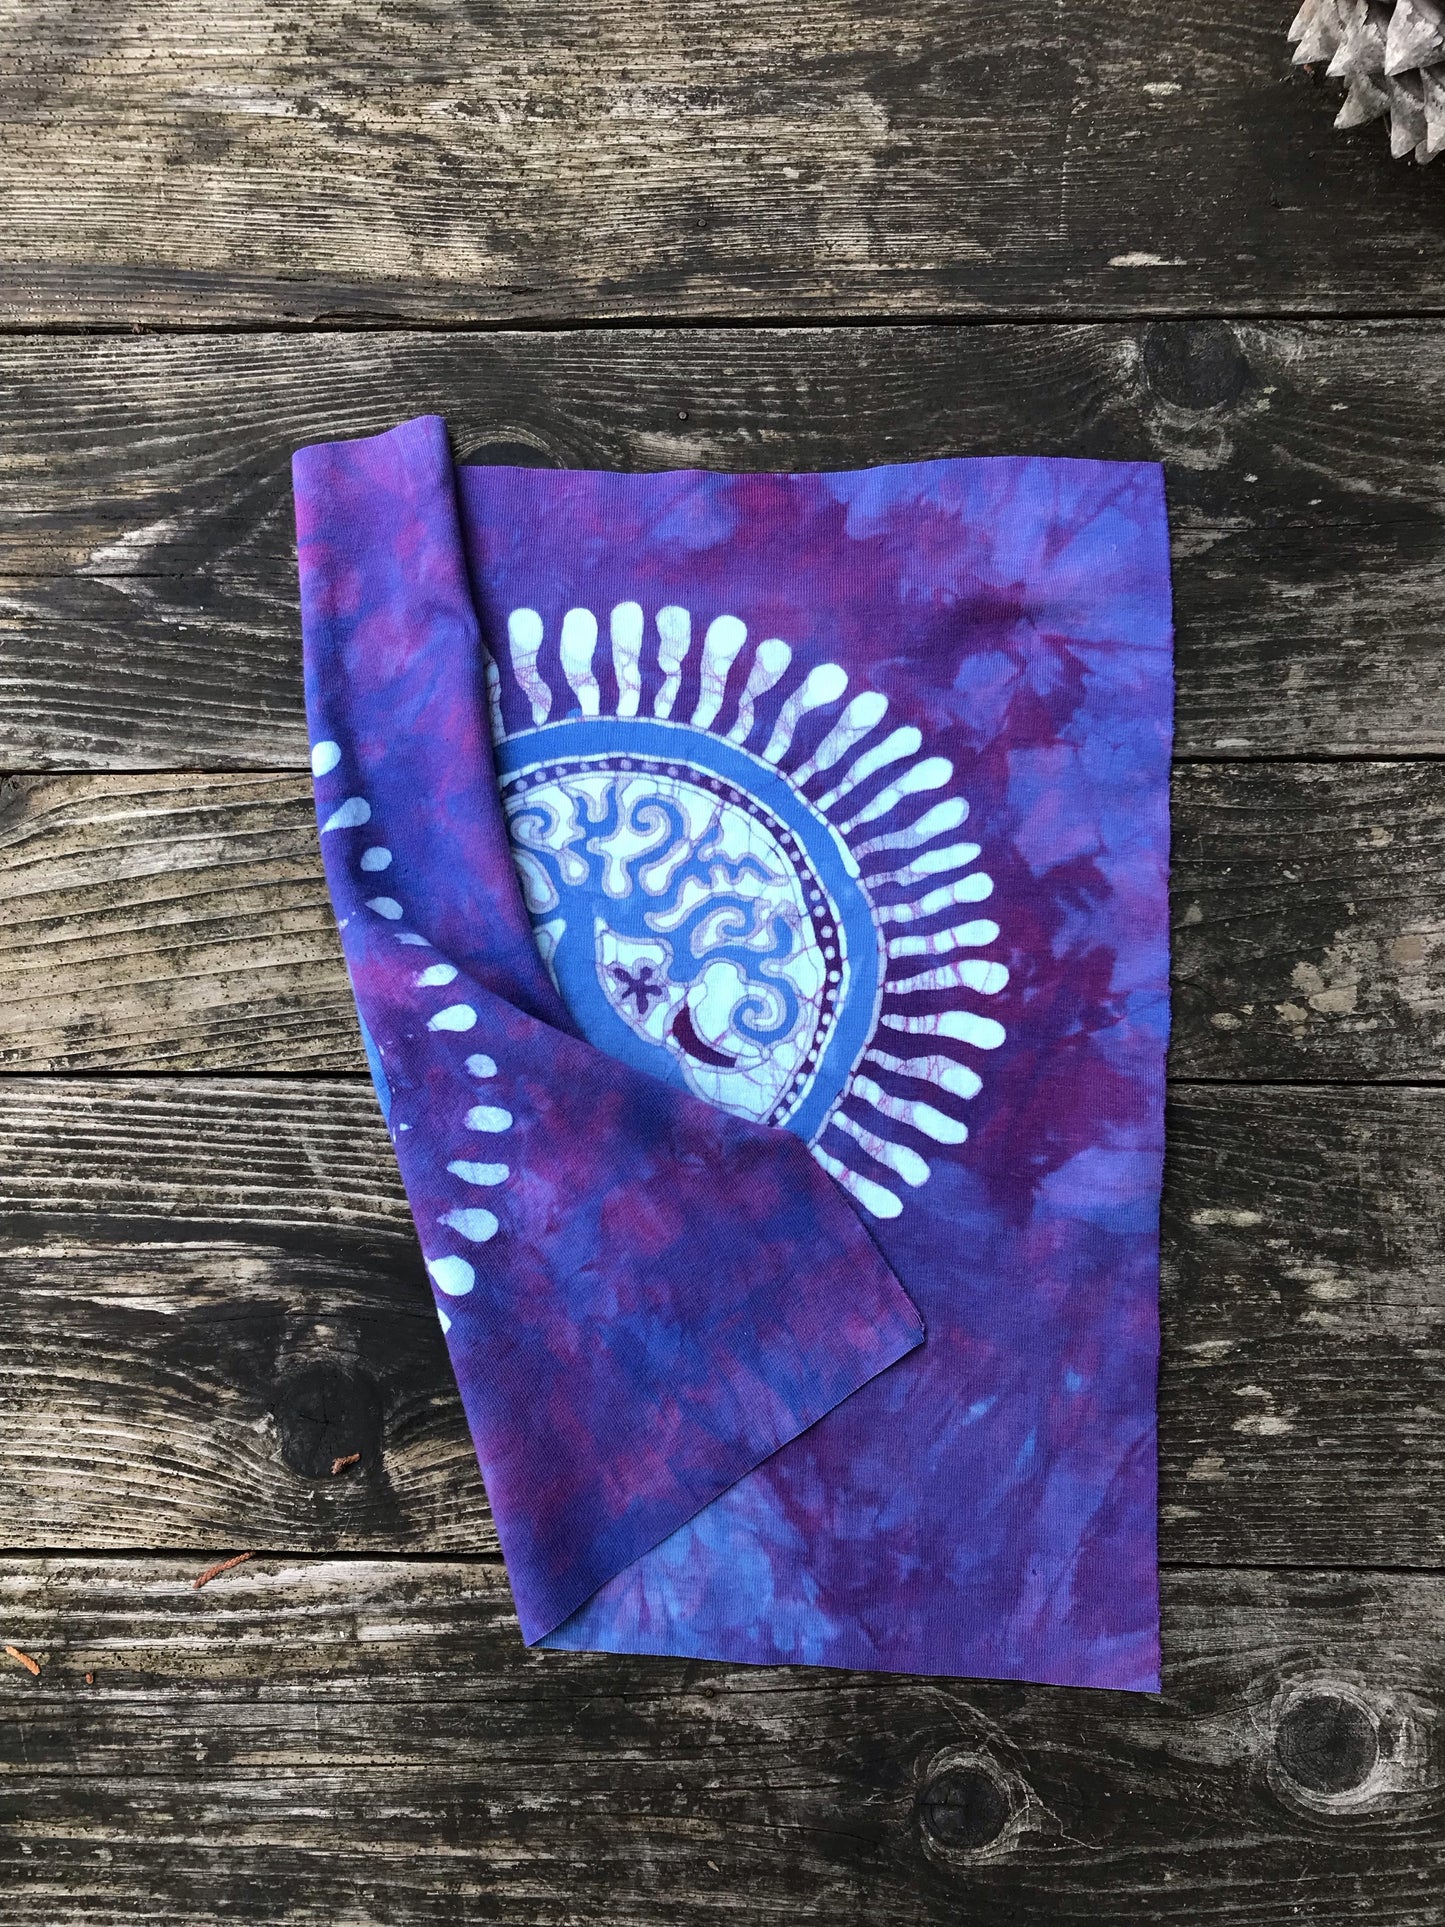 Hand Painted Batik Fabric Square - Tree of Life in Purple and Periwinkle Batikwalla by Victoria 